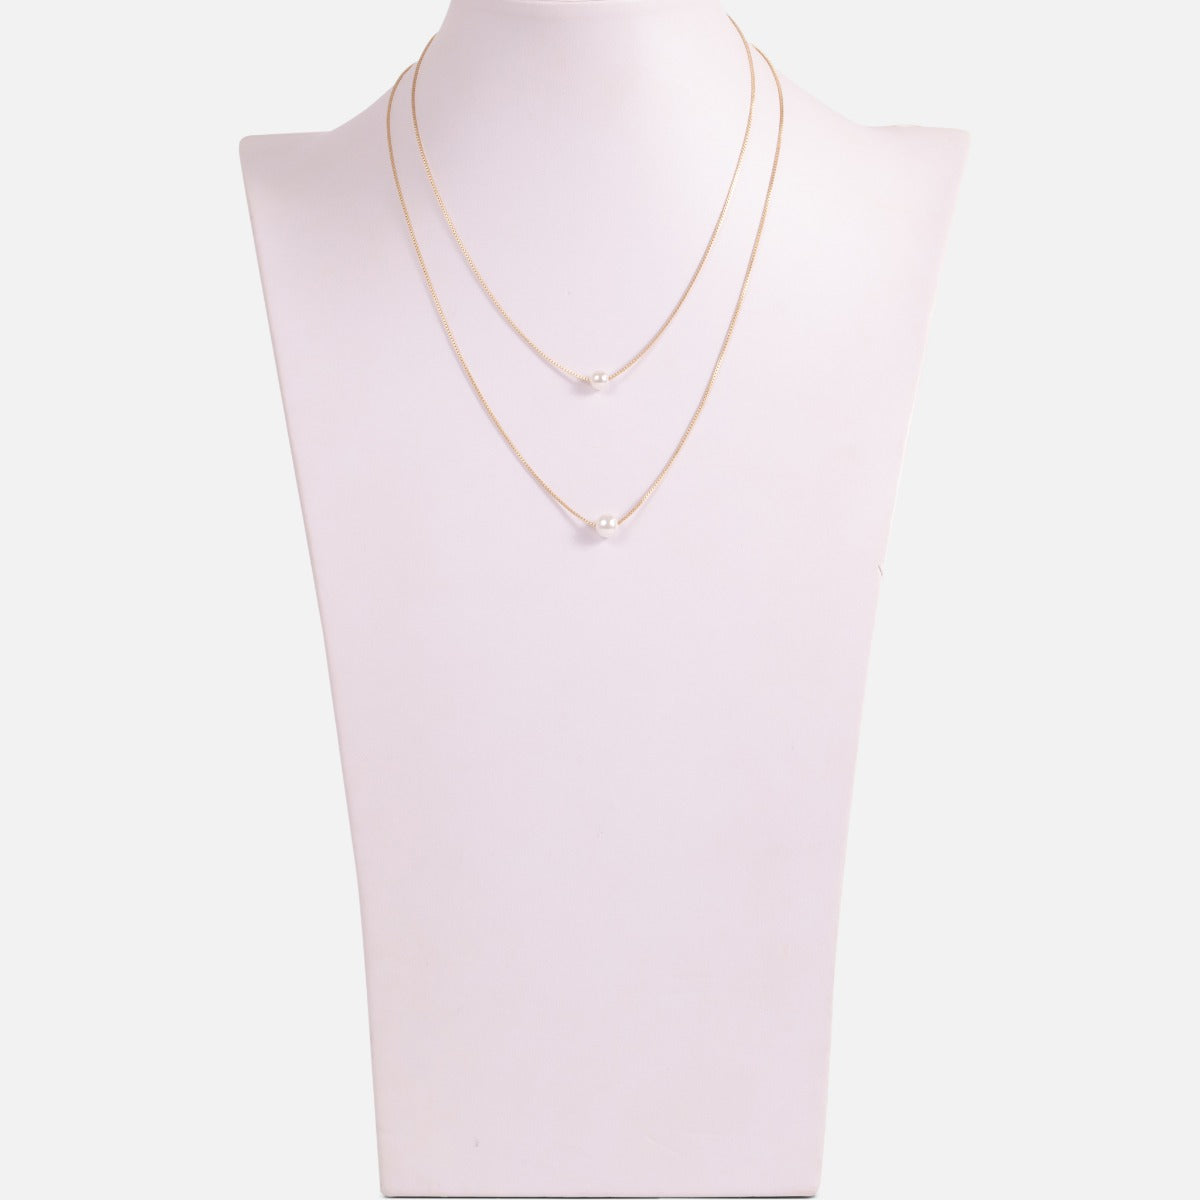 Set of two separate golden necklaces with pearl charm